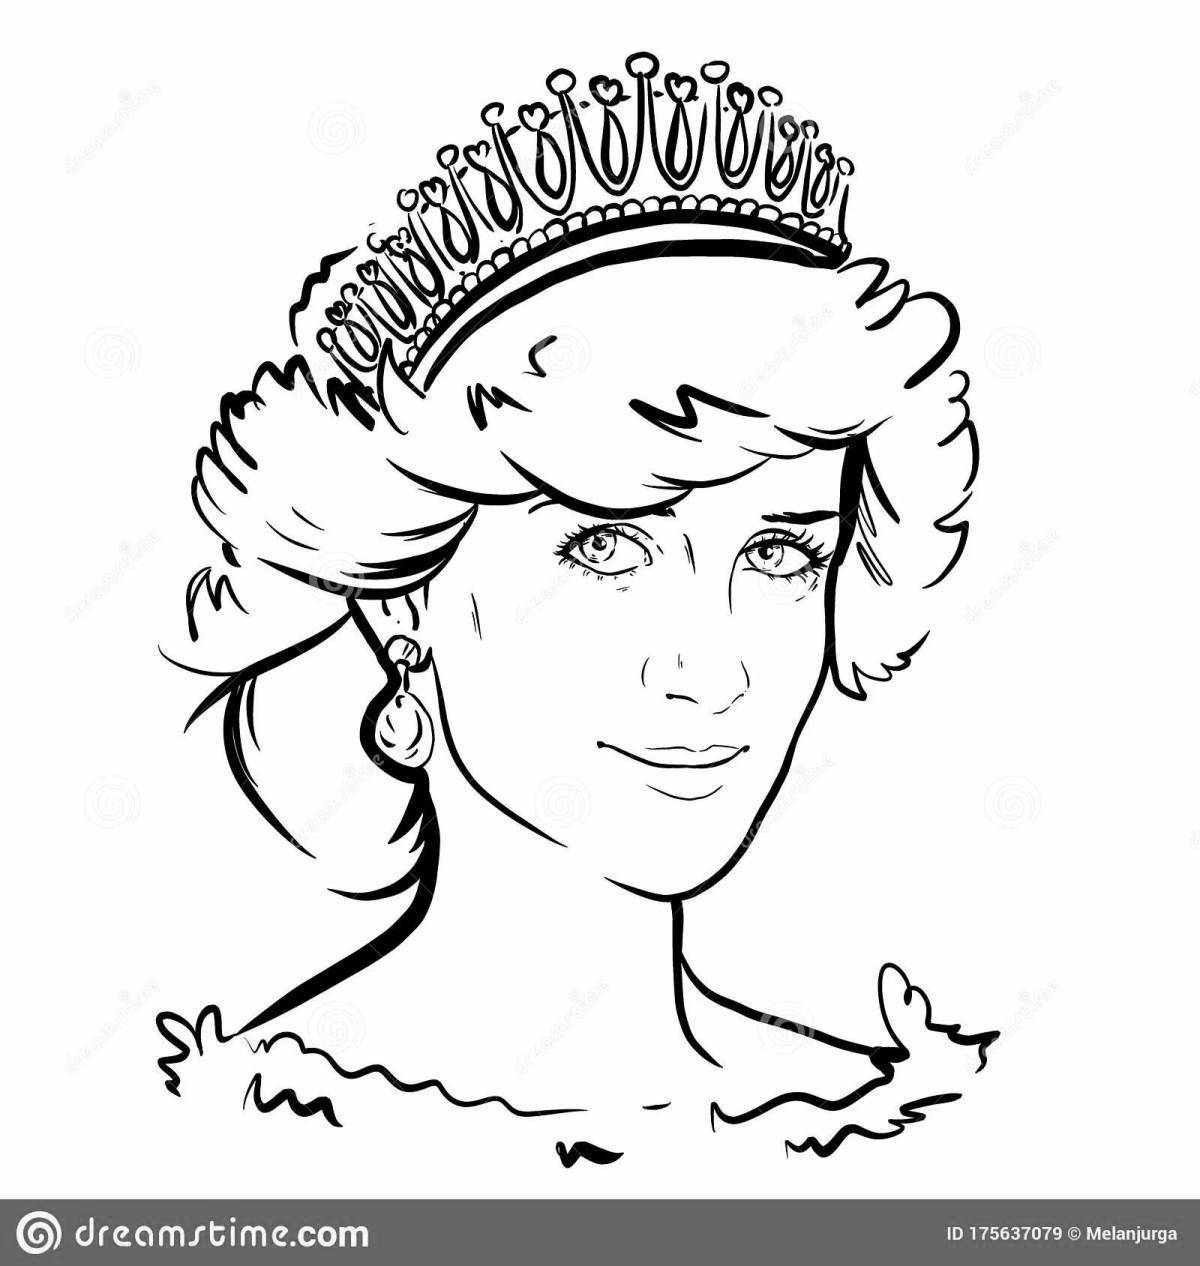 Exquisite princess diana coloring page